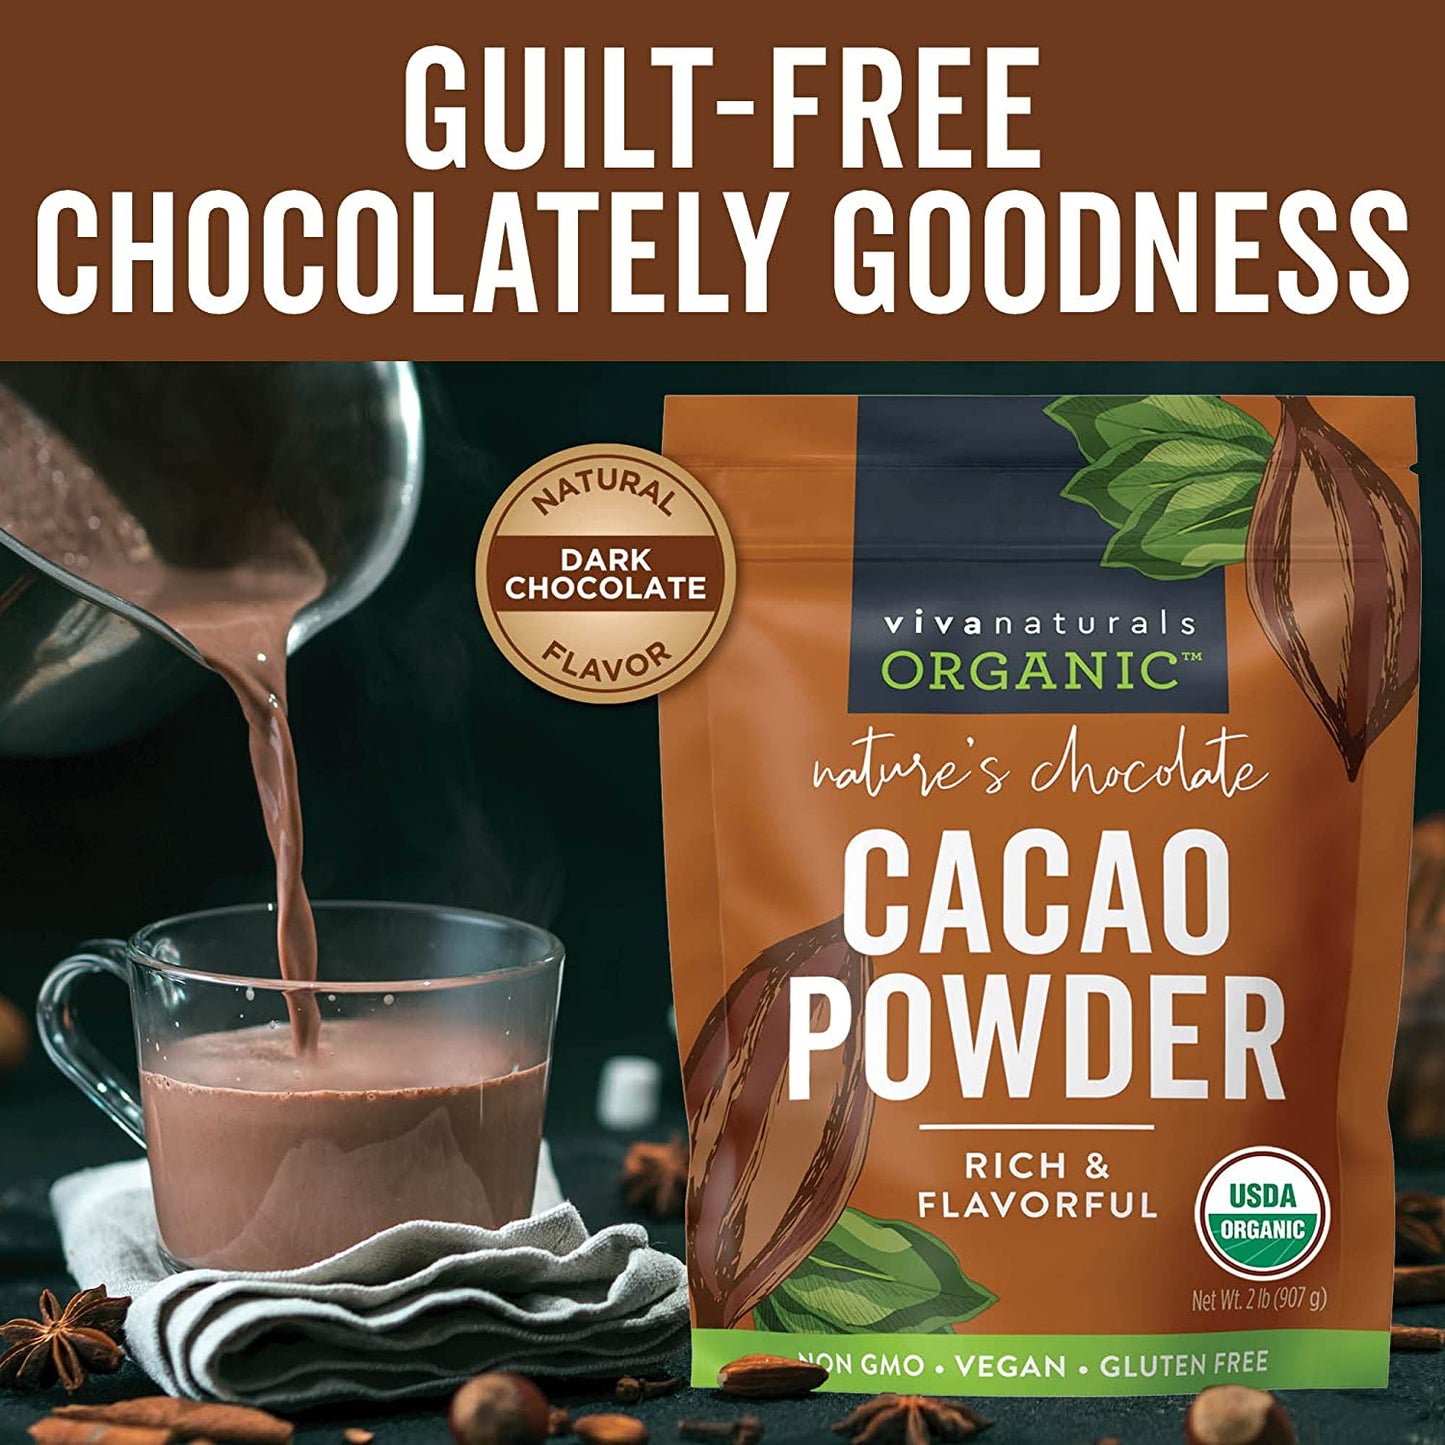 Organic Cacao Powder, 2lb - Unsweetened Cocoa Powder With Rich Dark Chocolate Flavor, Perfect for Baking & Smoothies, Non-GMO, Certified Vegan & Gluten-Free, 907 g